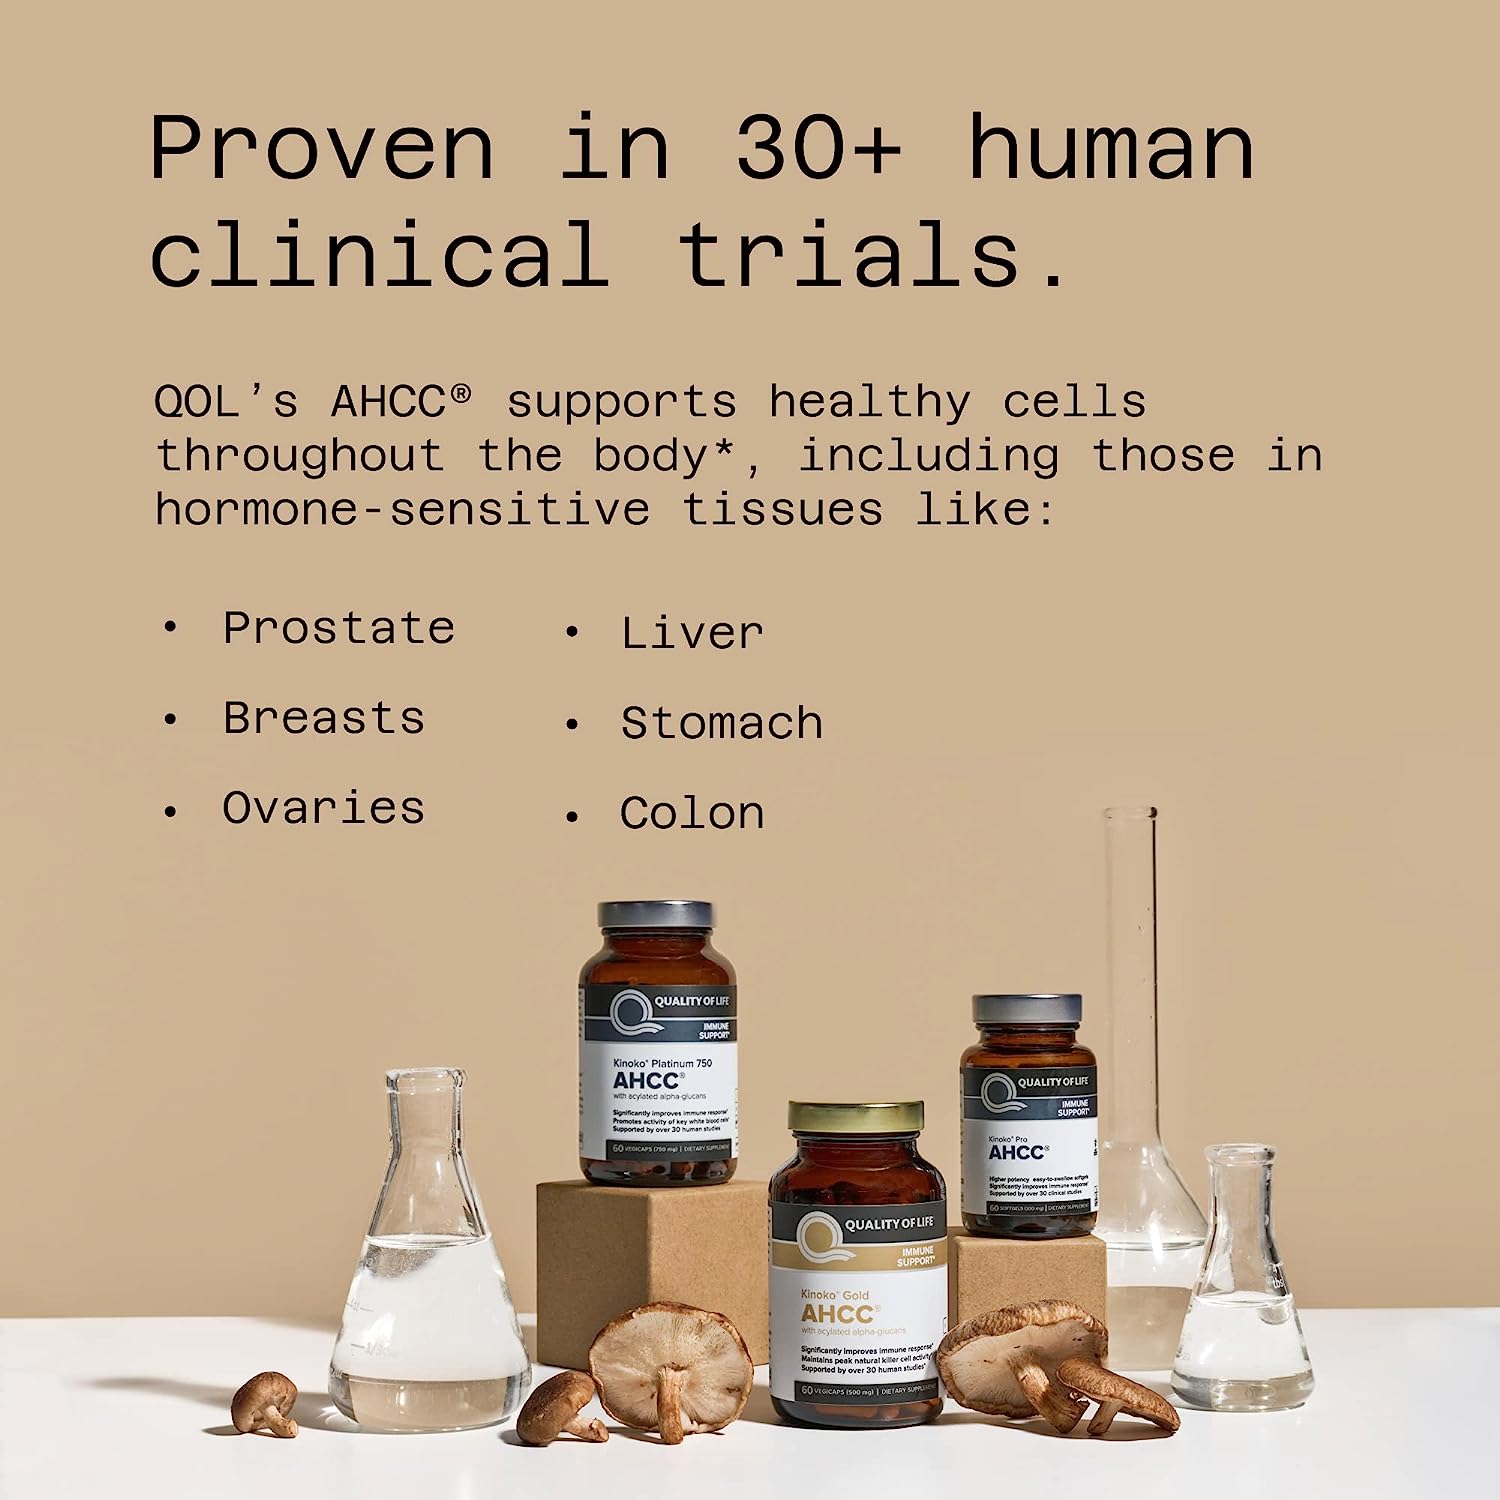 Proven in 30+ human clinical trials